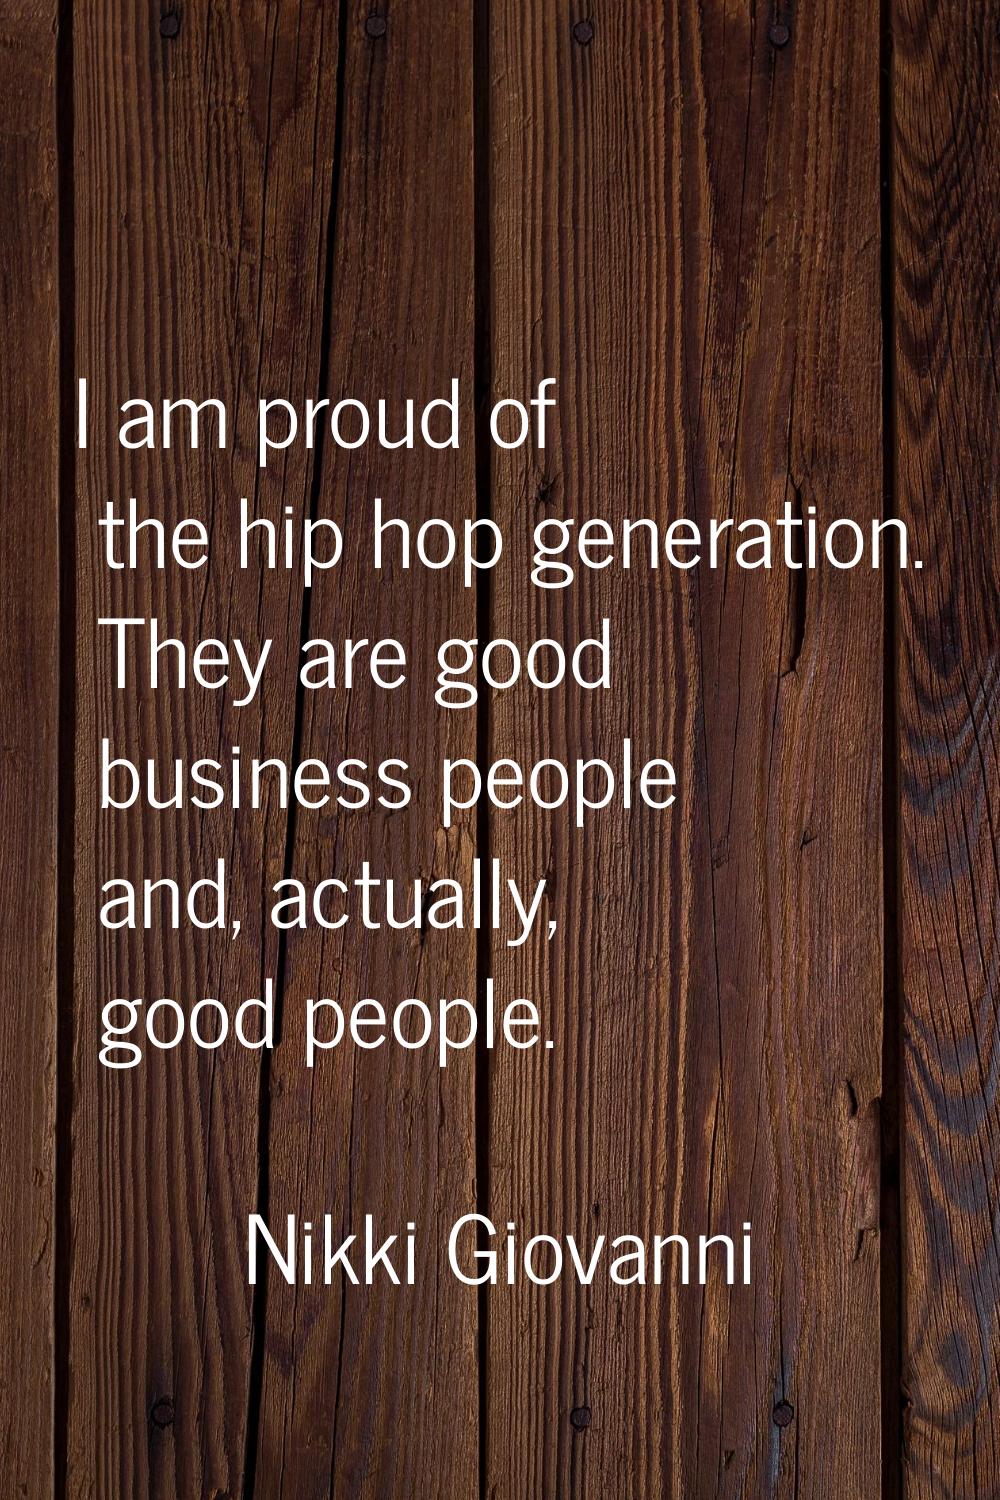 I am proud of the hip hop generation. They are good business people and, actually, good people.